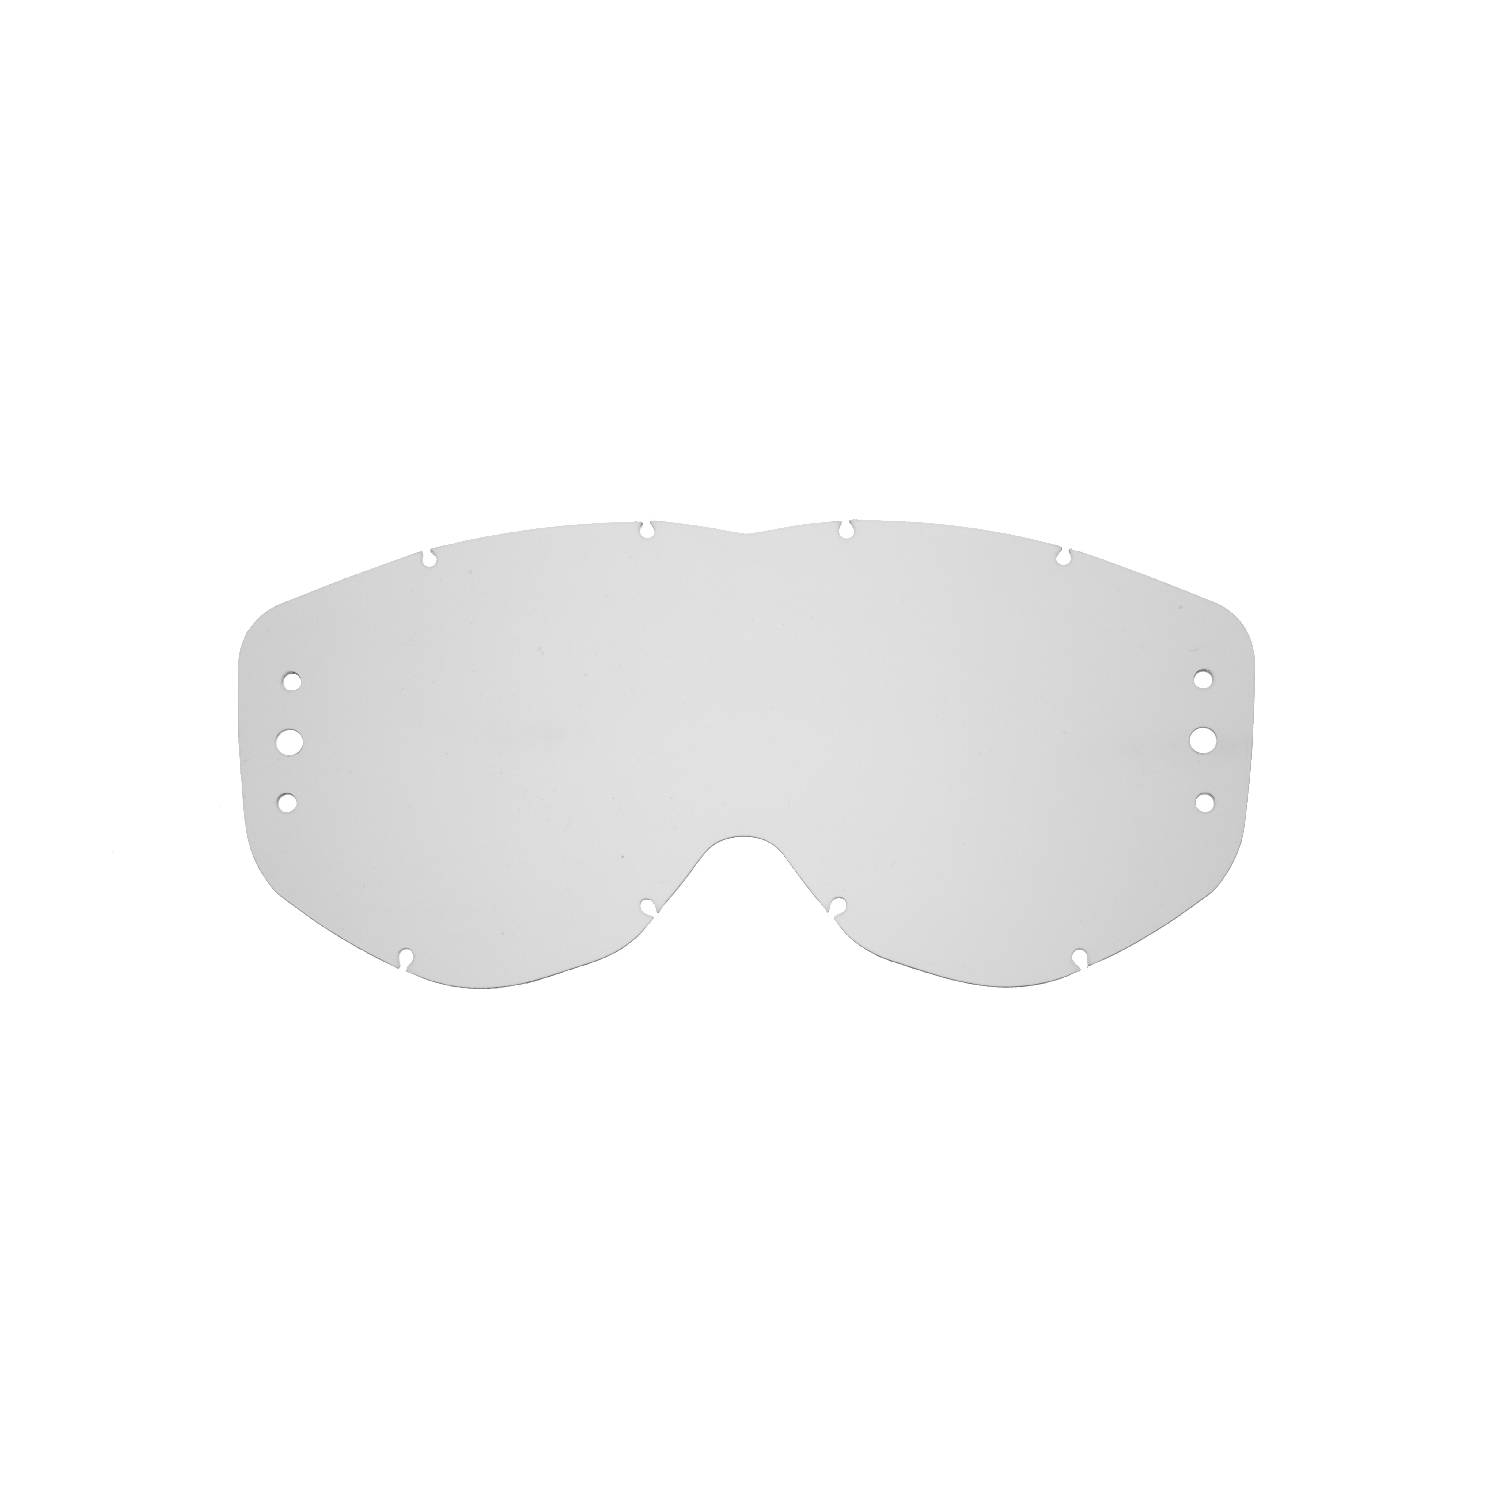 roll off lenses with clear lenses compatible for Spy Magneto goggle